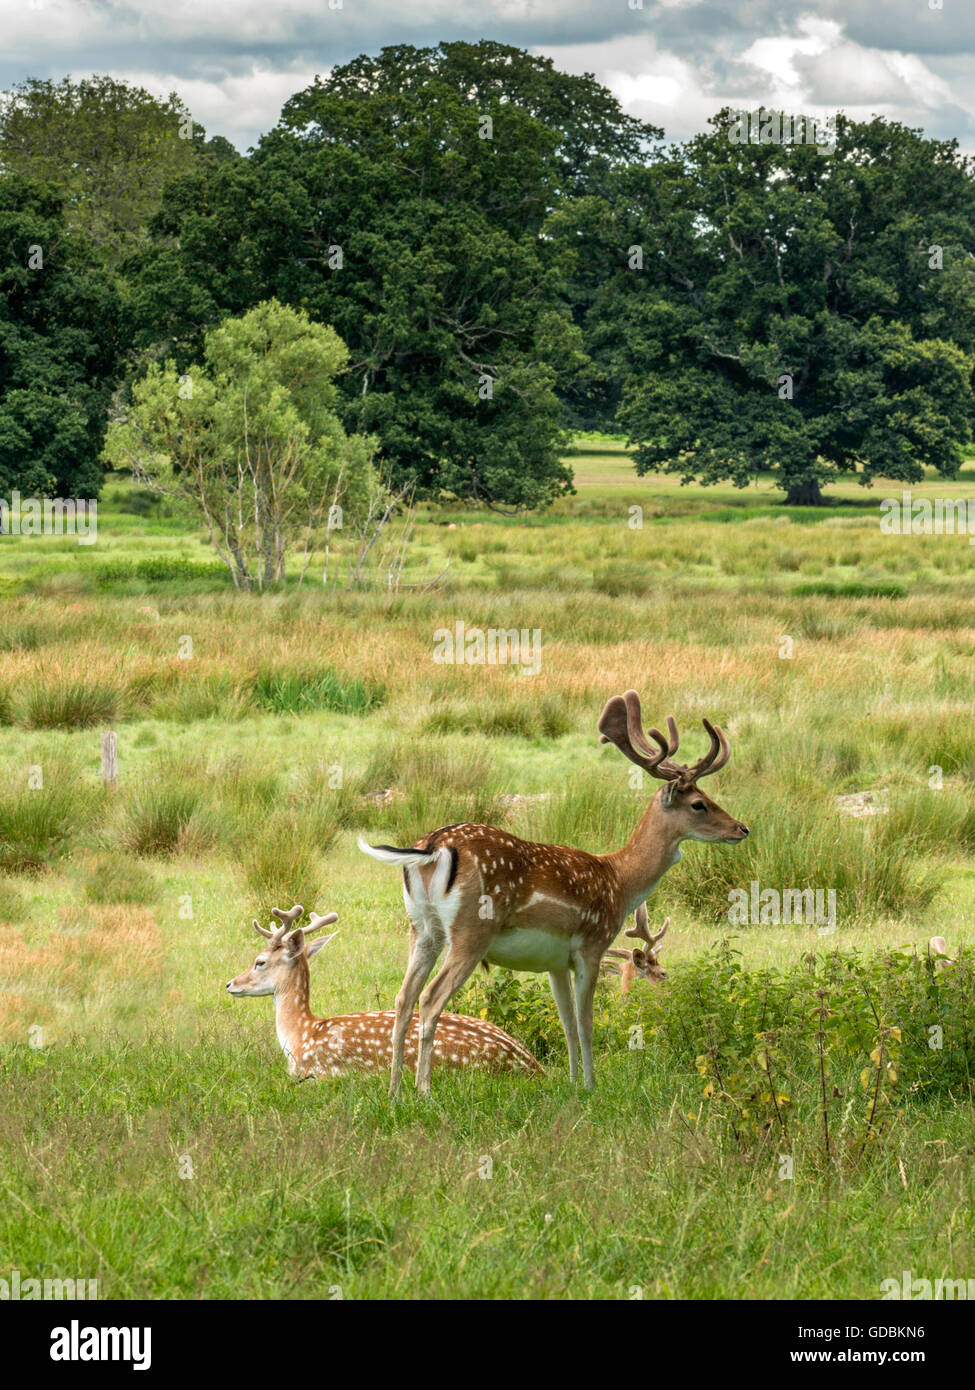 Herd of Fallow Deer (Dama dama), grazing, relaxing and keeping cool in the shade during the July 2016 British, mini heatwave. Stock Photo